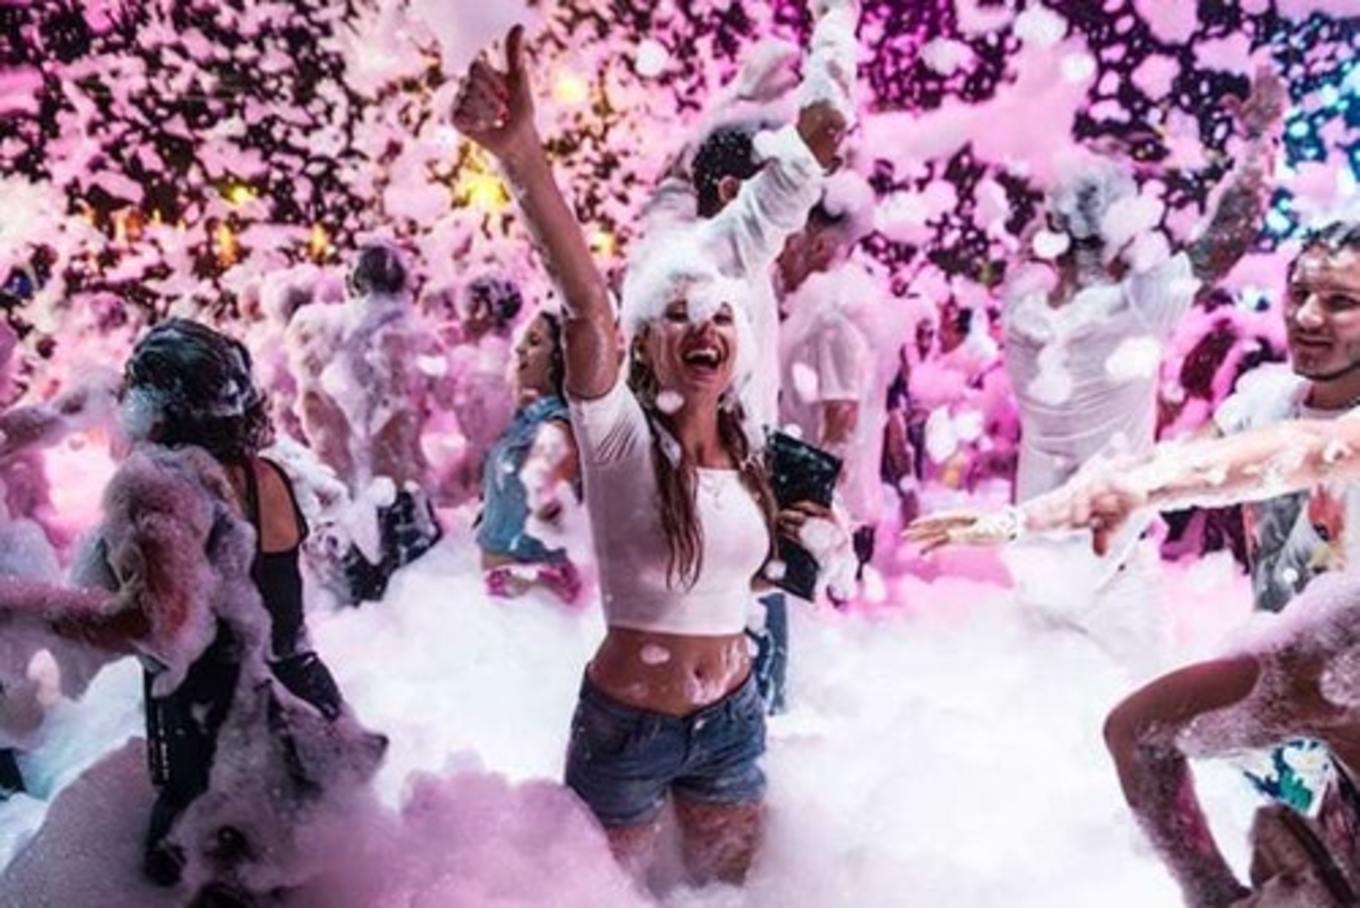 Get Your Tickets Now to this Super Summer Foam Party at Cages – That's  Shanghai